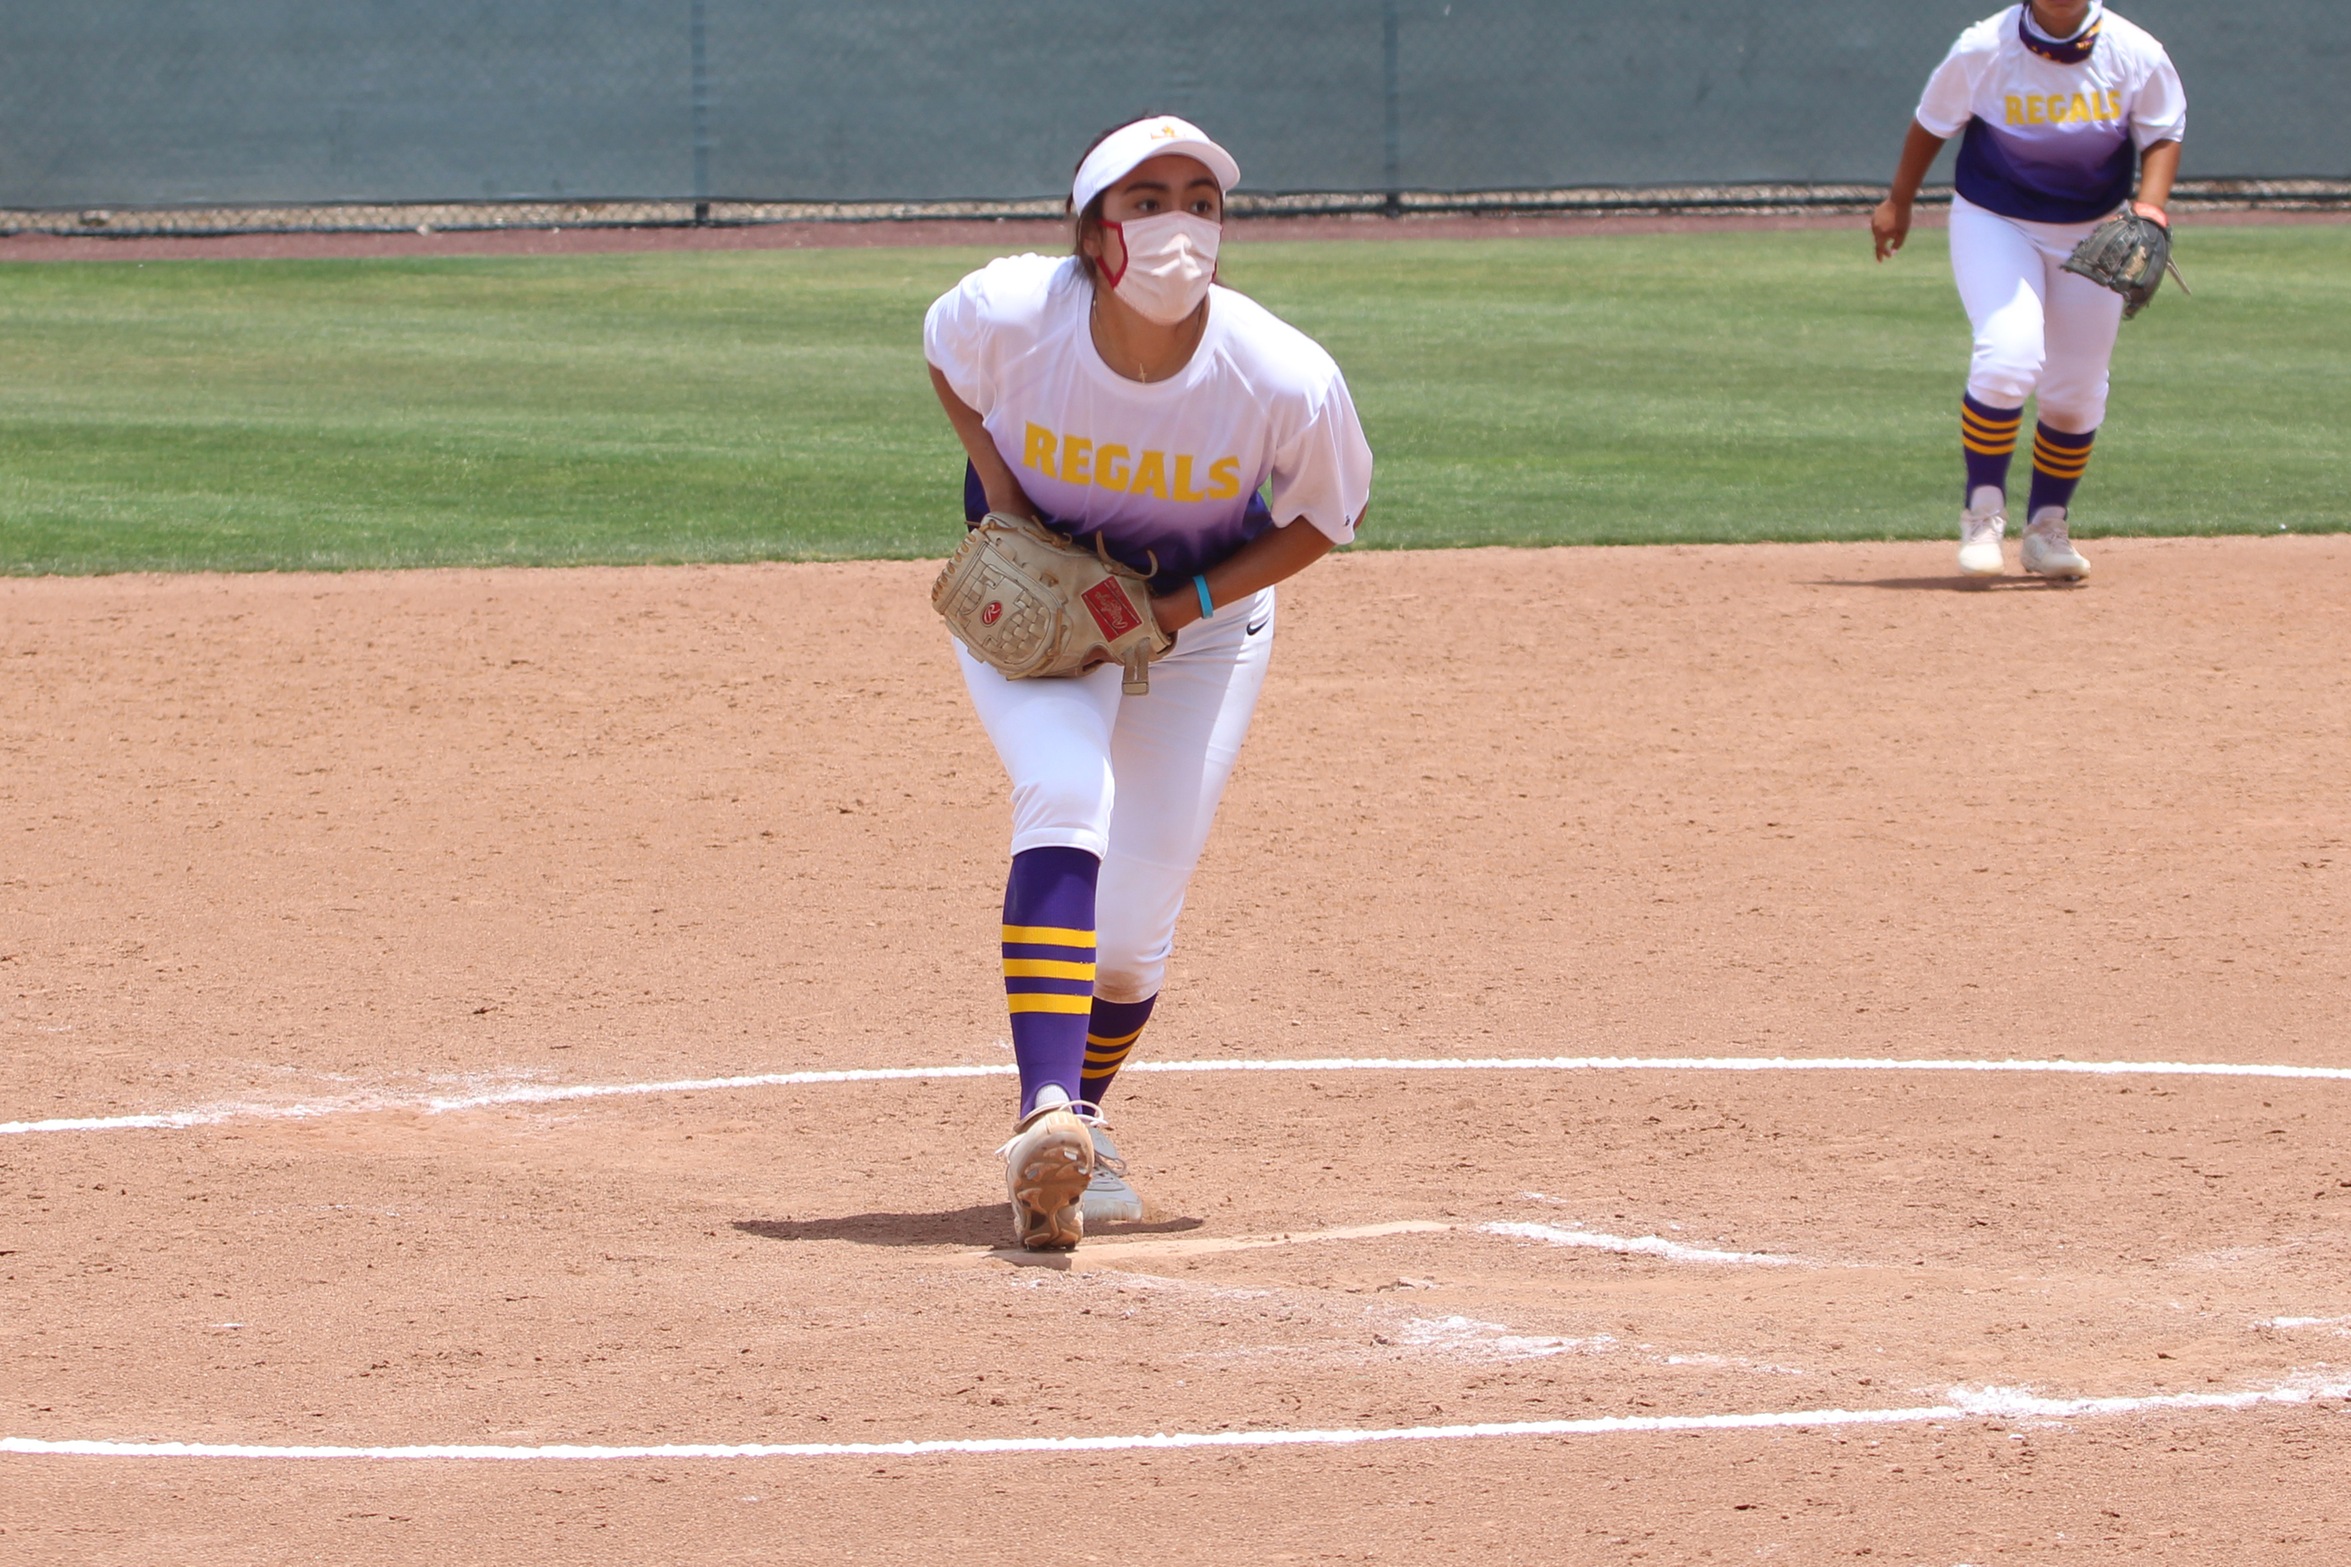 Regals Bested by Redlands in Doubleheader